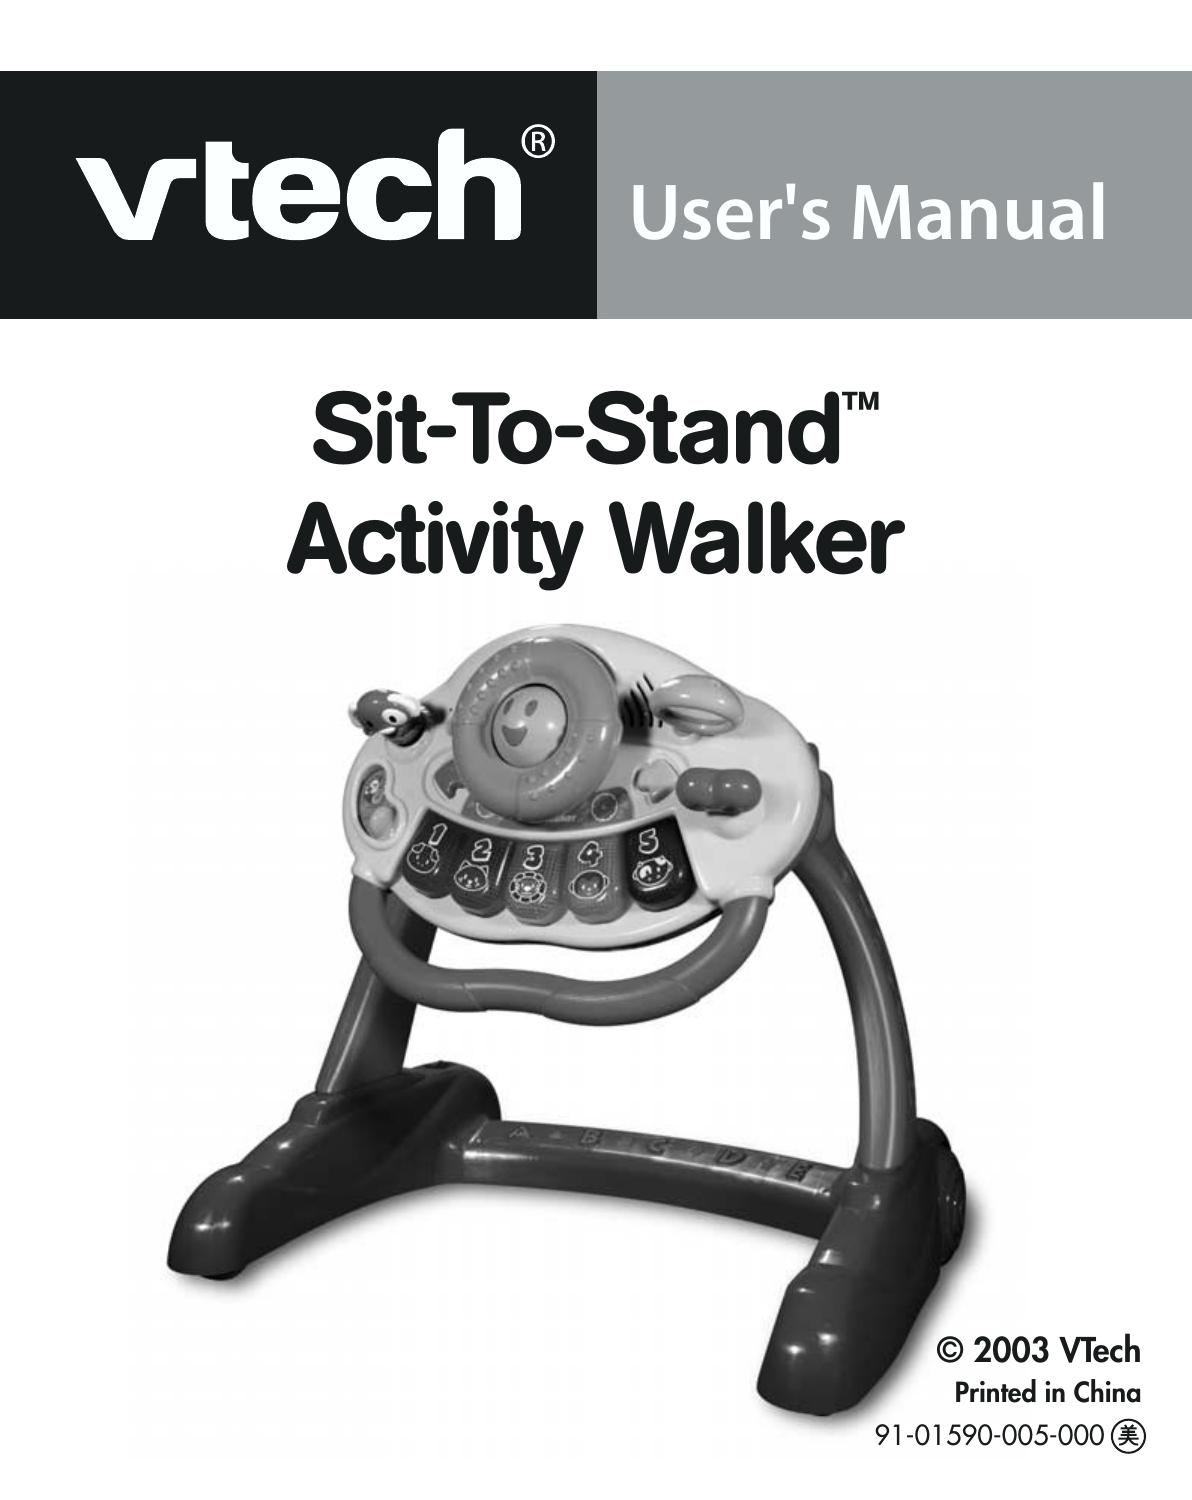 VTech sit-to-stand Musical Instrument User Manual